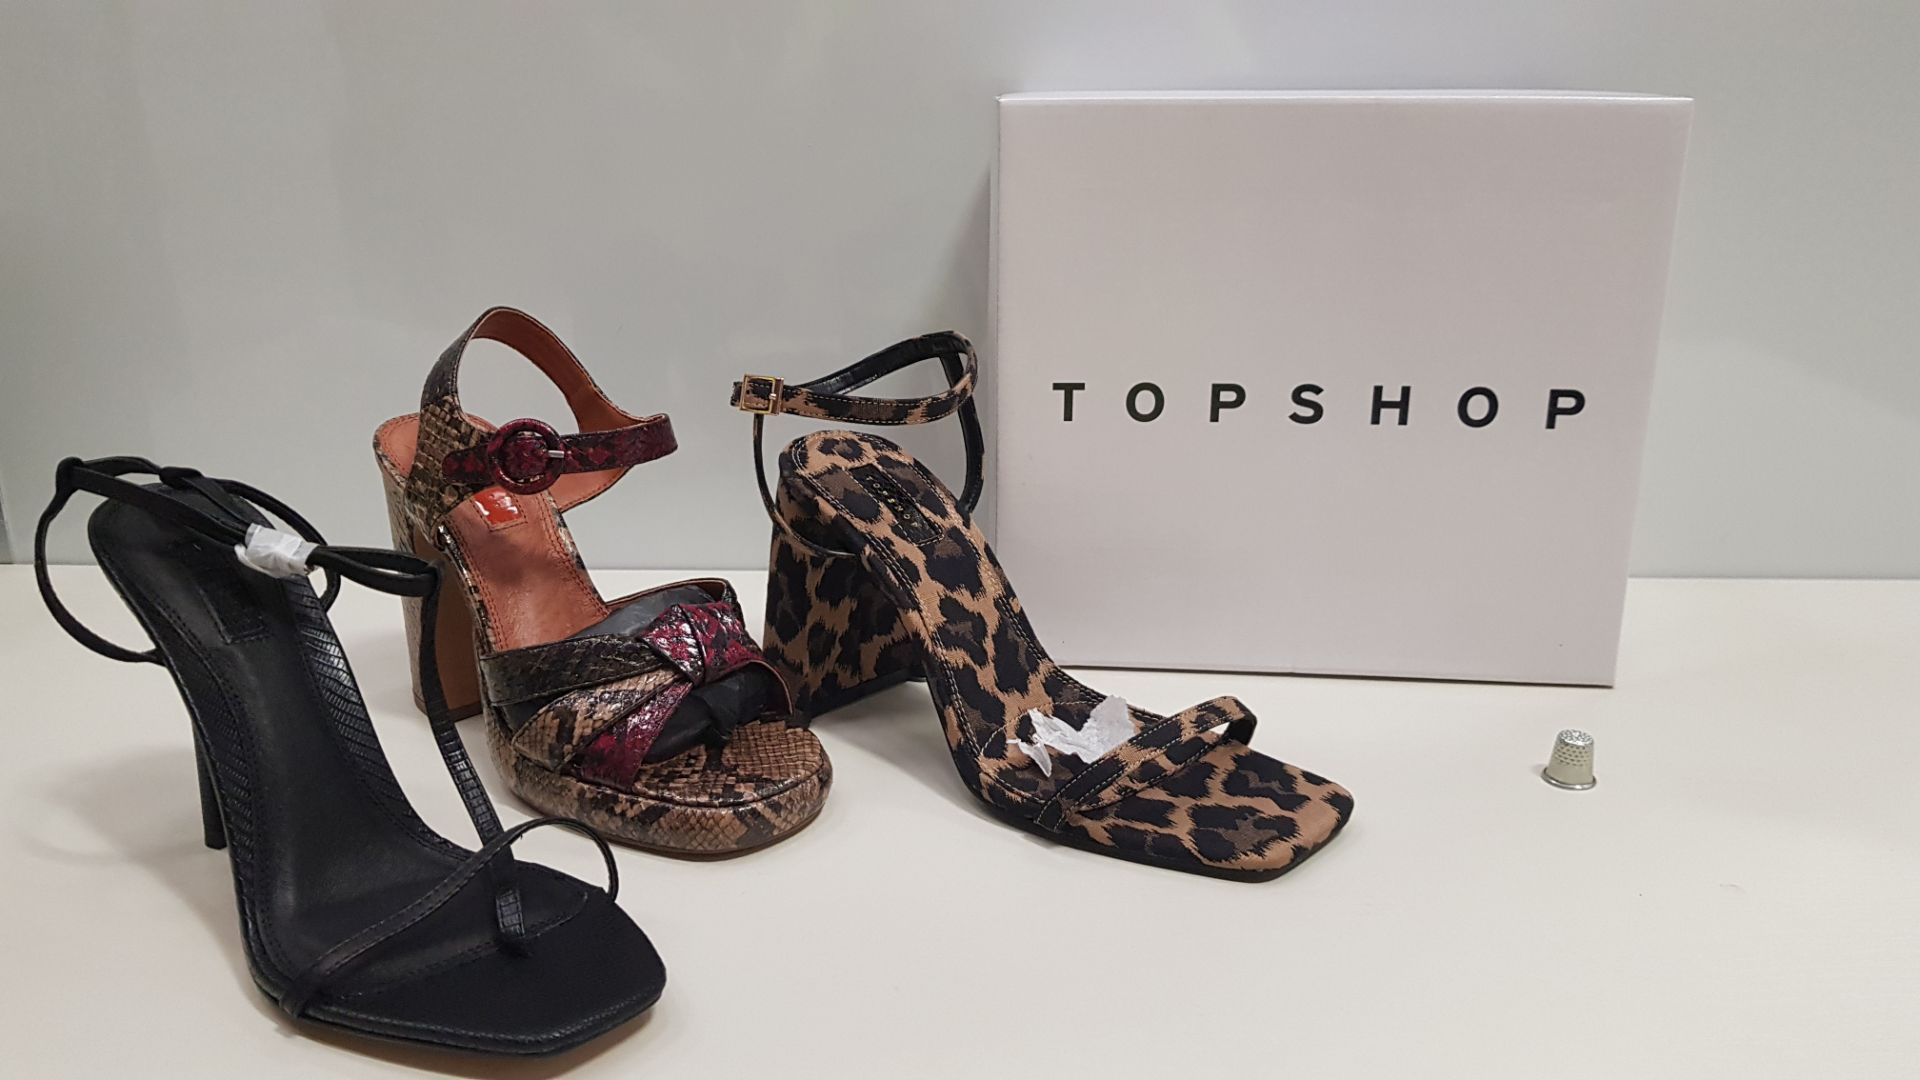 15 X BRAND NEW TOPSHOES SHOES - 8 X BRAND NEW ROCCO TRUE LEOPARD UK SIZE 8, 5 X BRAND NEW TOPSHOP